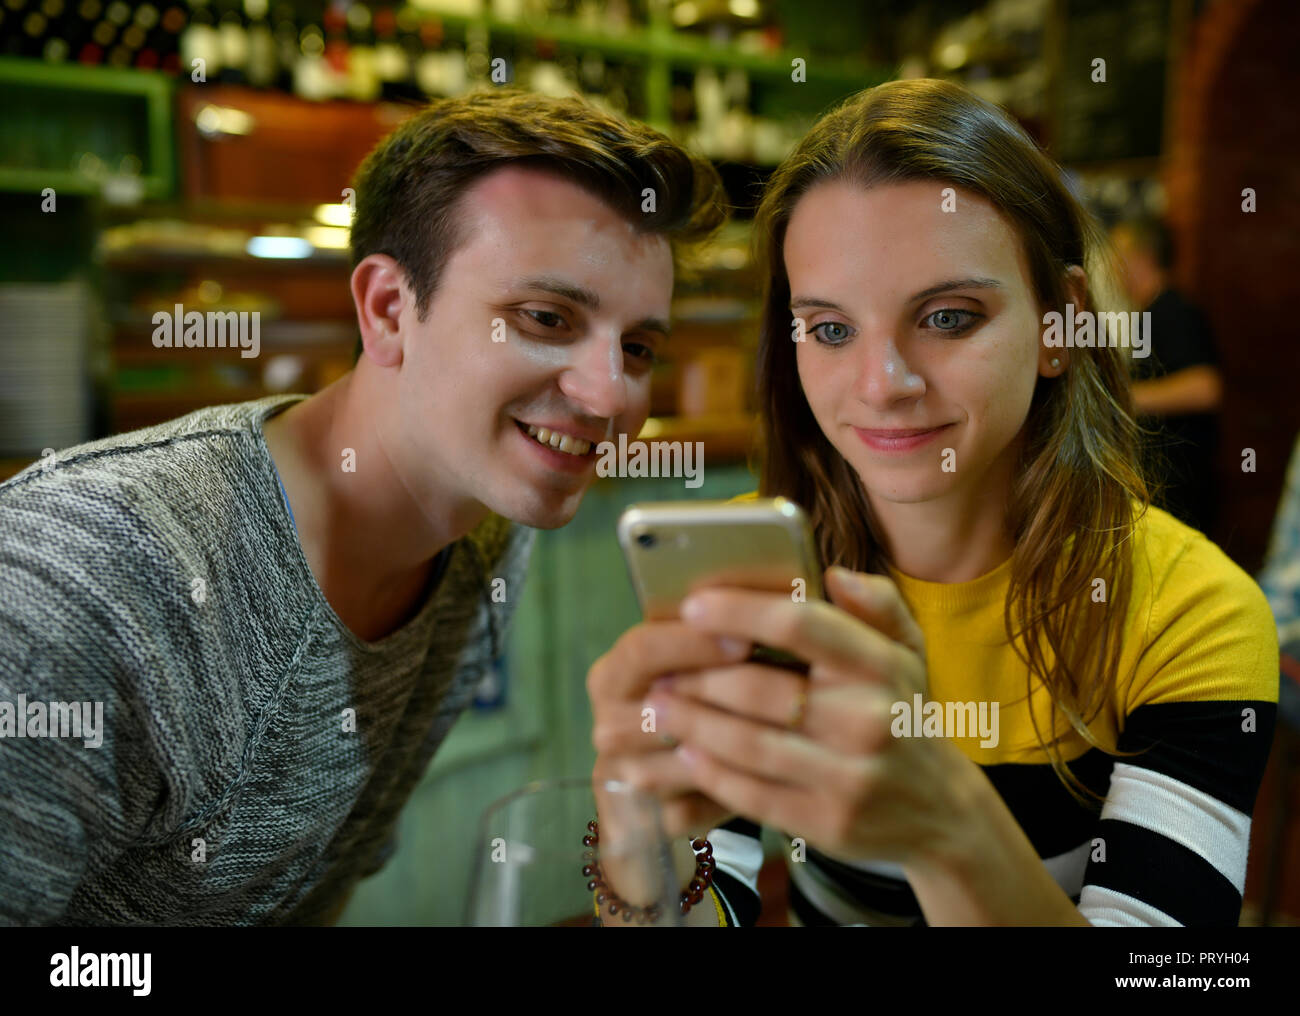 Young couple looks interested in mobile phones, Tenerife, Canary Islands, Spain Stock Photo